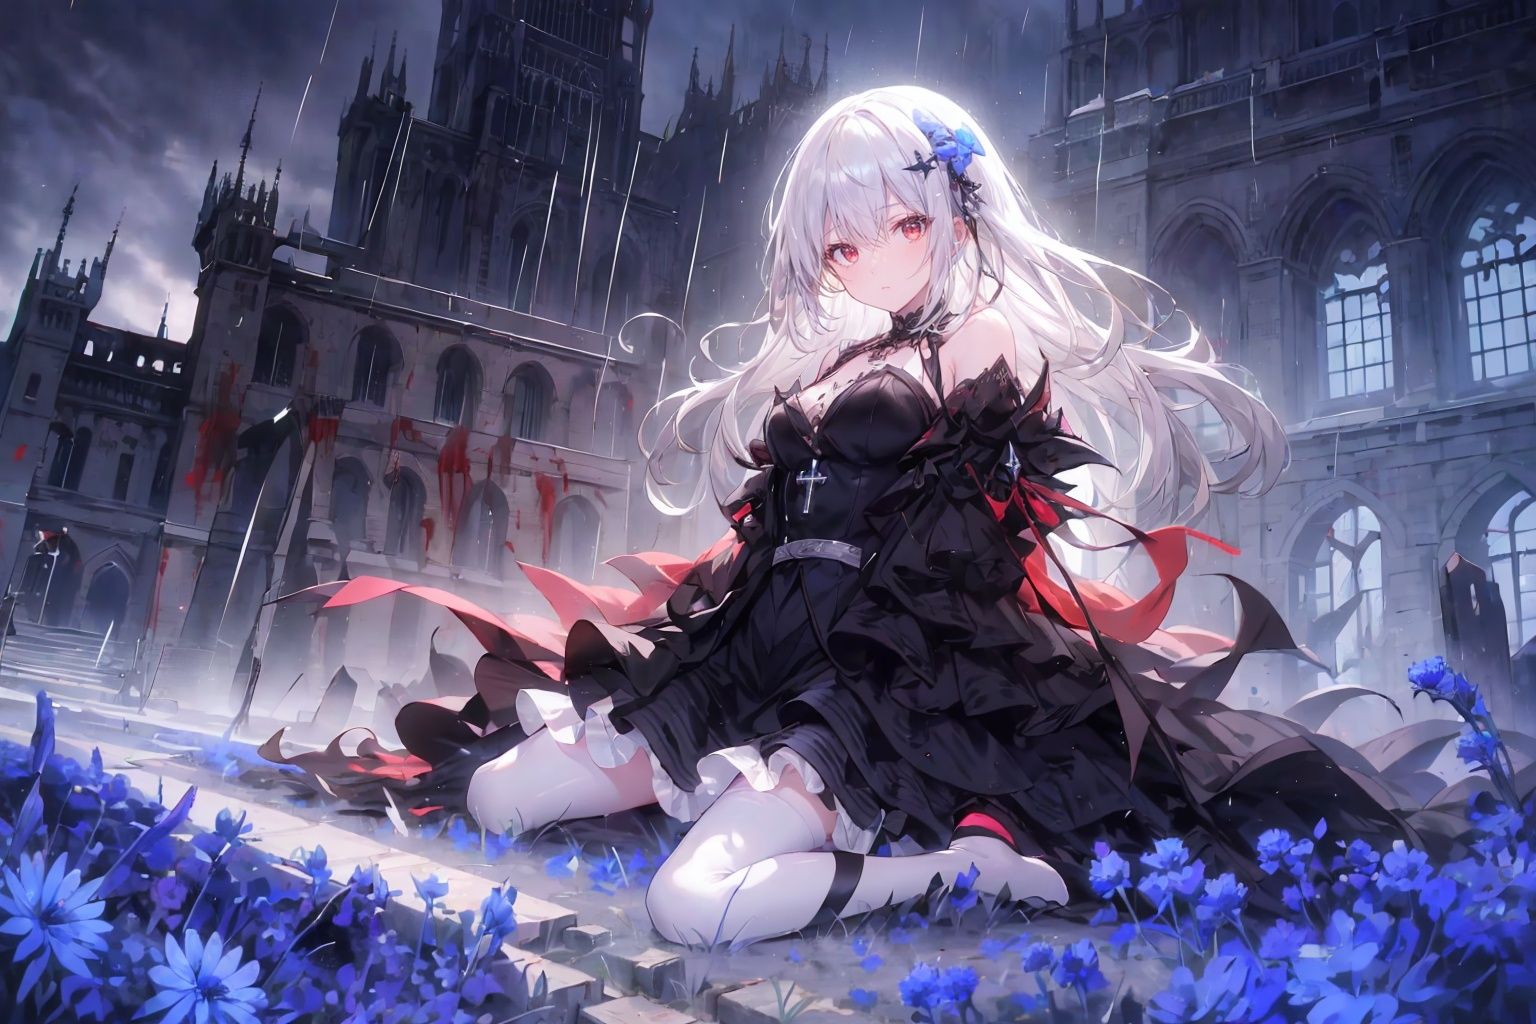  ((1girl,solo, alone, delicate face, cute, red eye pupil, pink eyelashes, red eye shadow, pink lips,excellent face,expression is enchanting,)), Character close-up,
leaning against the ruins, with a floating skeleton in the background.(white stockings),her posture is seductive, her hand is holding her face, and there is a flicker of evil energy runes in the background, blood mist filled, and soft light. No shoes,My feet are covered in bones. Skeletons, many skeletons. Official art, unit 8 k wallpaper, ultra detailed, beautiful and aesthetic, masterpiece, best quality, extremely detailed, dynamic angle, paper skin, radius, iuminosity, cowboyshot, the most beautiful form of Chaos, elegant, a brutalist designed, visual colors, romanticism, by James Jean, roby dwi antono, cross tran, francis bacon, Michael mraz, Adrian ghenie, Petra cortright, Gerhard richter, Takato yamamoto, ashley wood, atmospheric, ((late at night,dark)), light rain,dark, limited palette, contrast,(((Cornflower))), cornflower, cornflower,vines, forest, lens flare, hdr, Tyndall effect,damp,wet,cold theme, broken wall, aqua theme, floating hair, high detail, nayutaren, Nyarly,Sitting in the Flower Sea